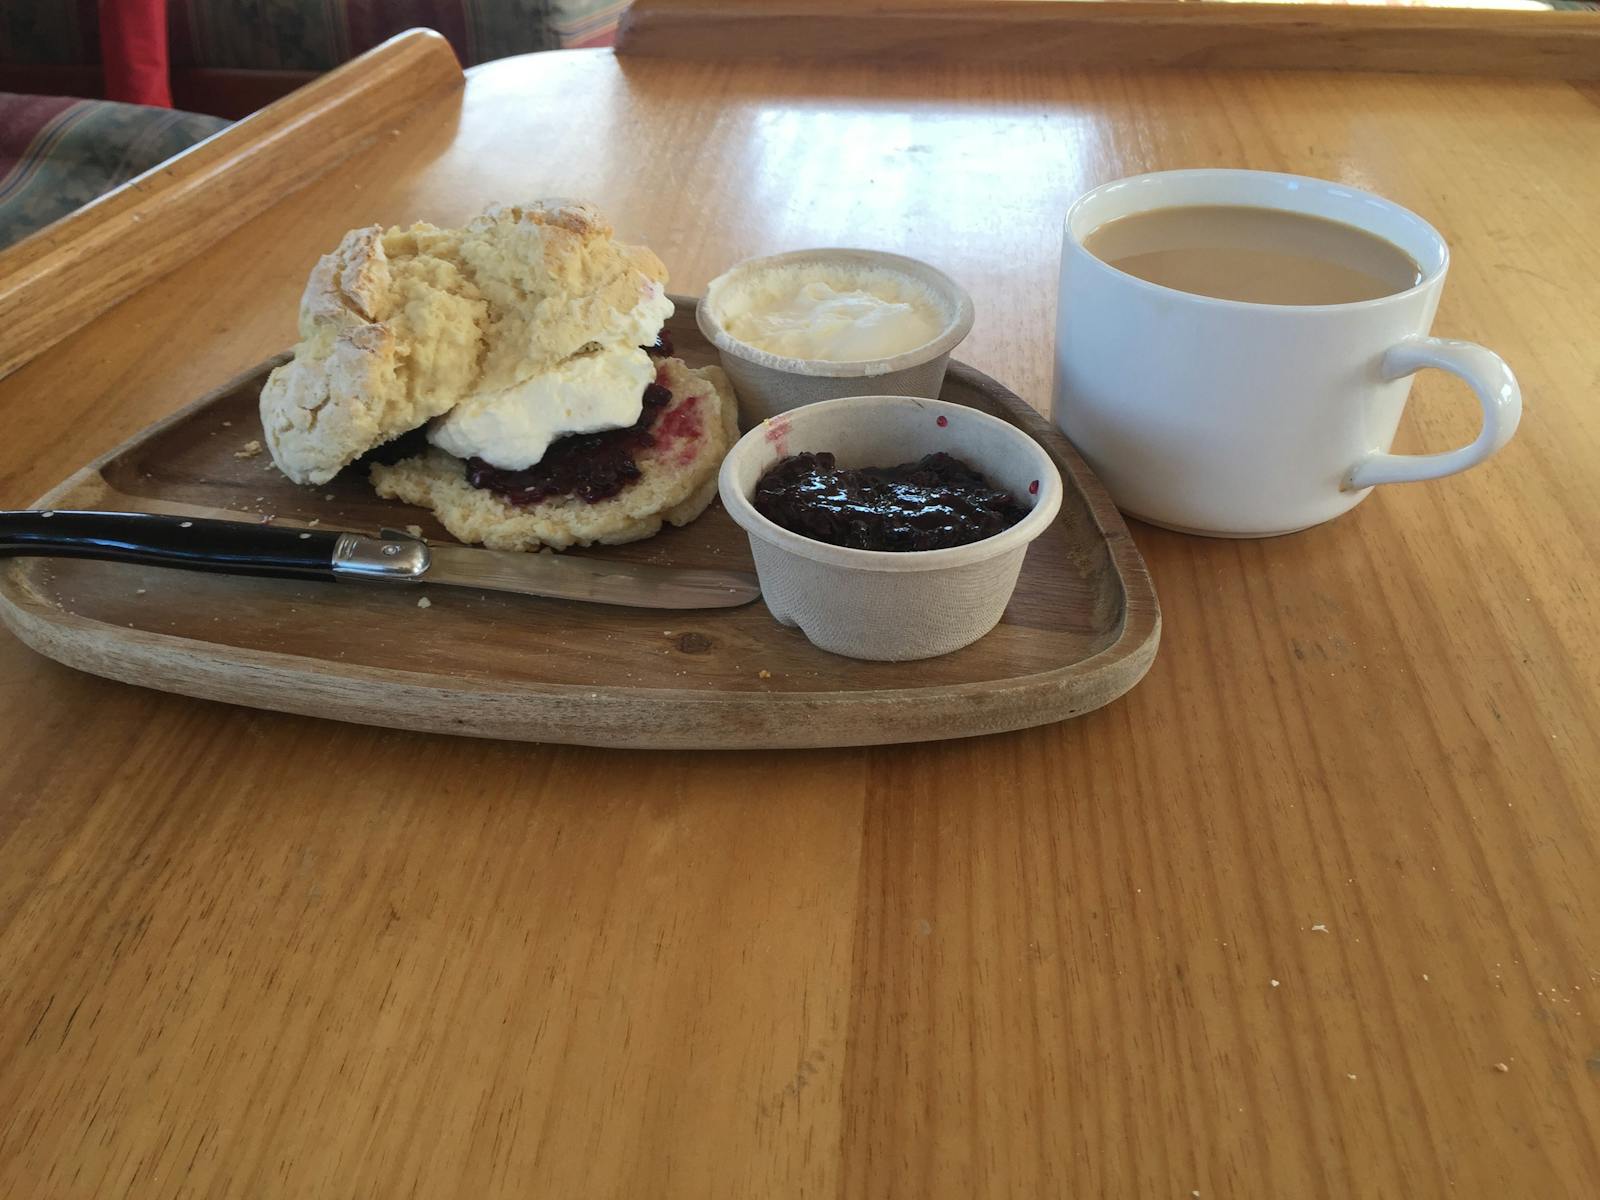 A delicious Scone and coffee